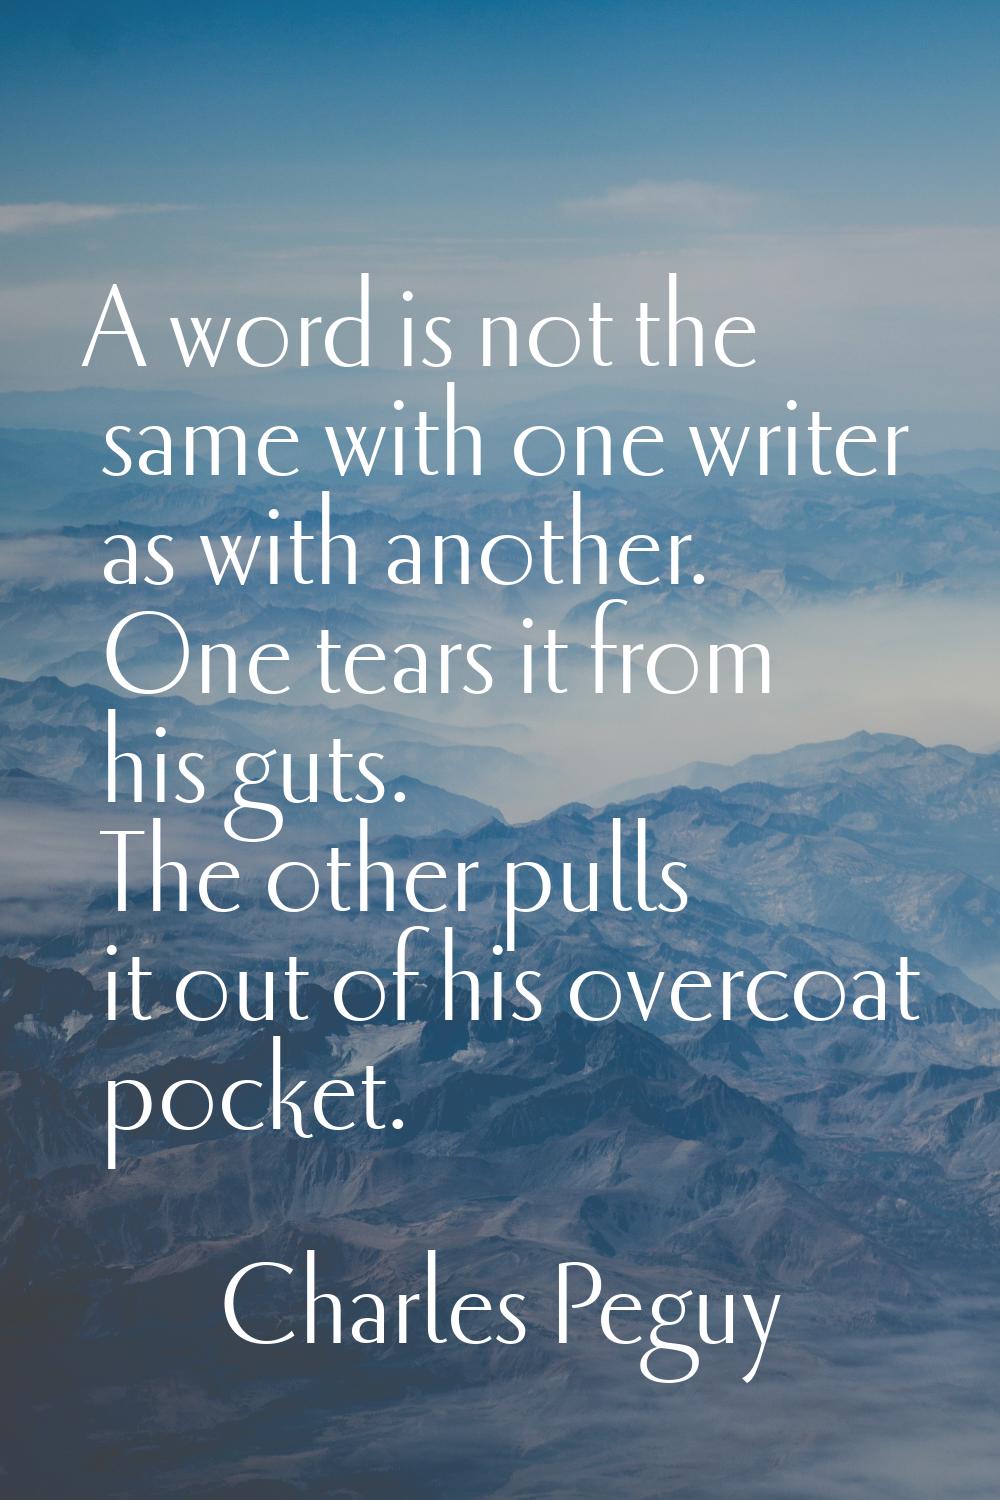 A word is not the same with one writer as with another. One tears it from his guts. The other pulls